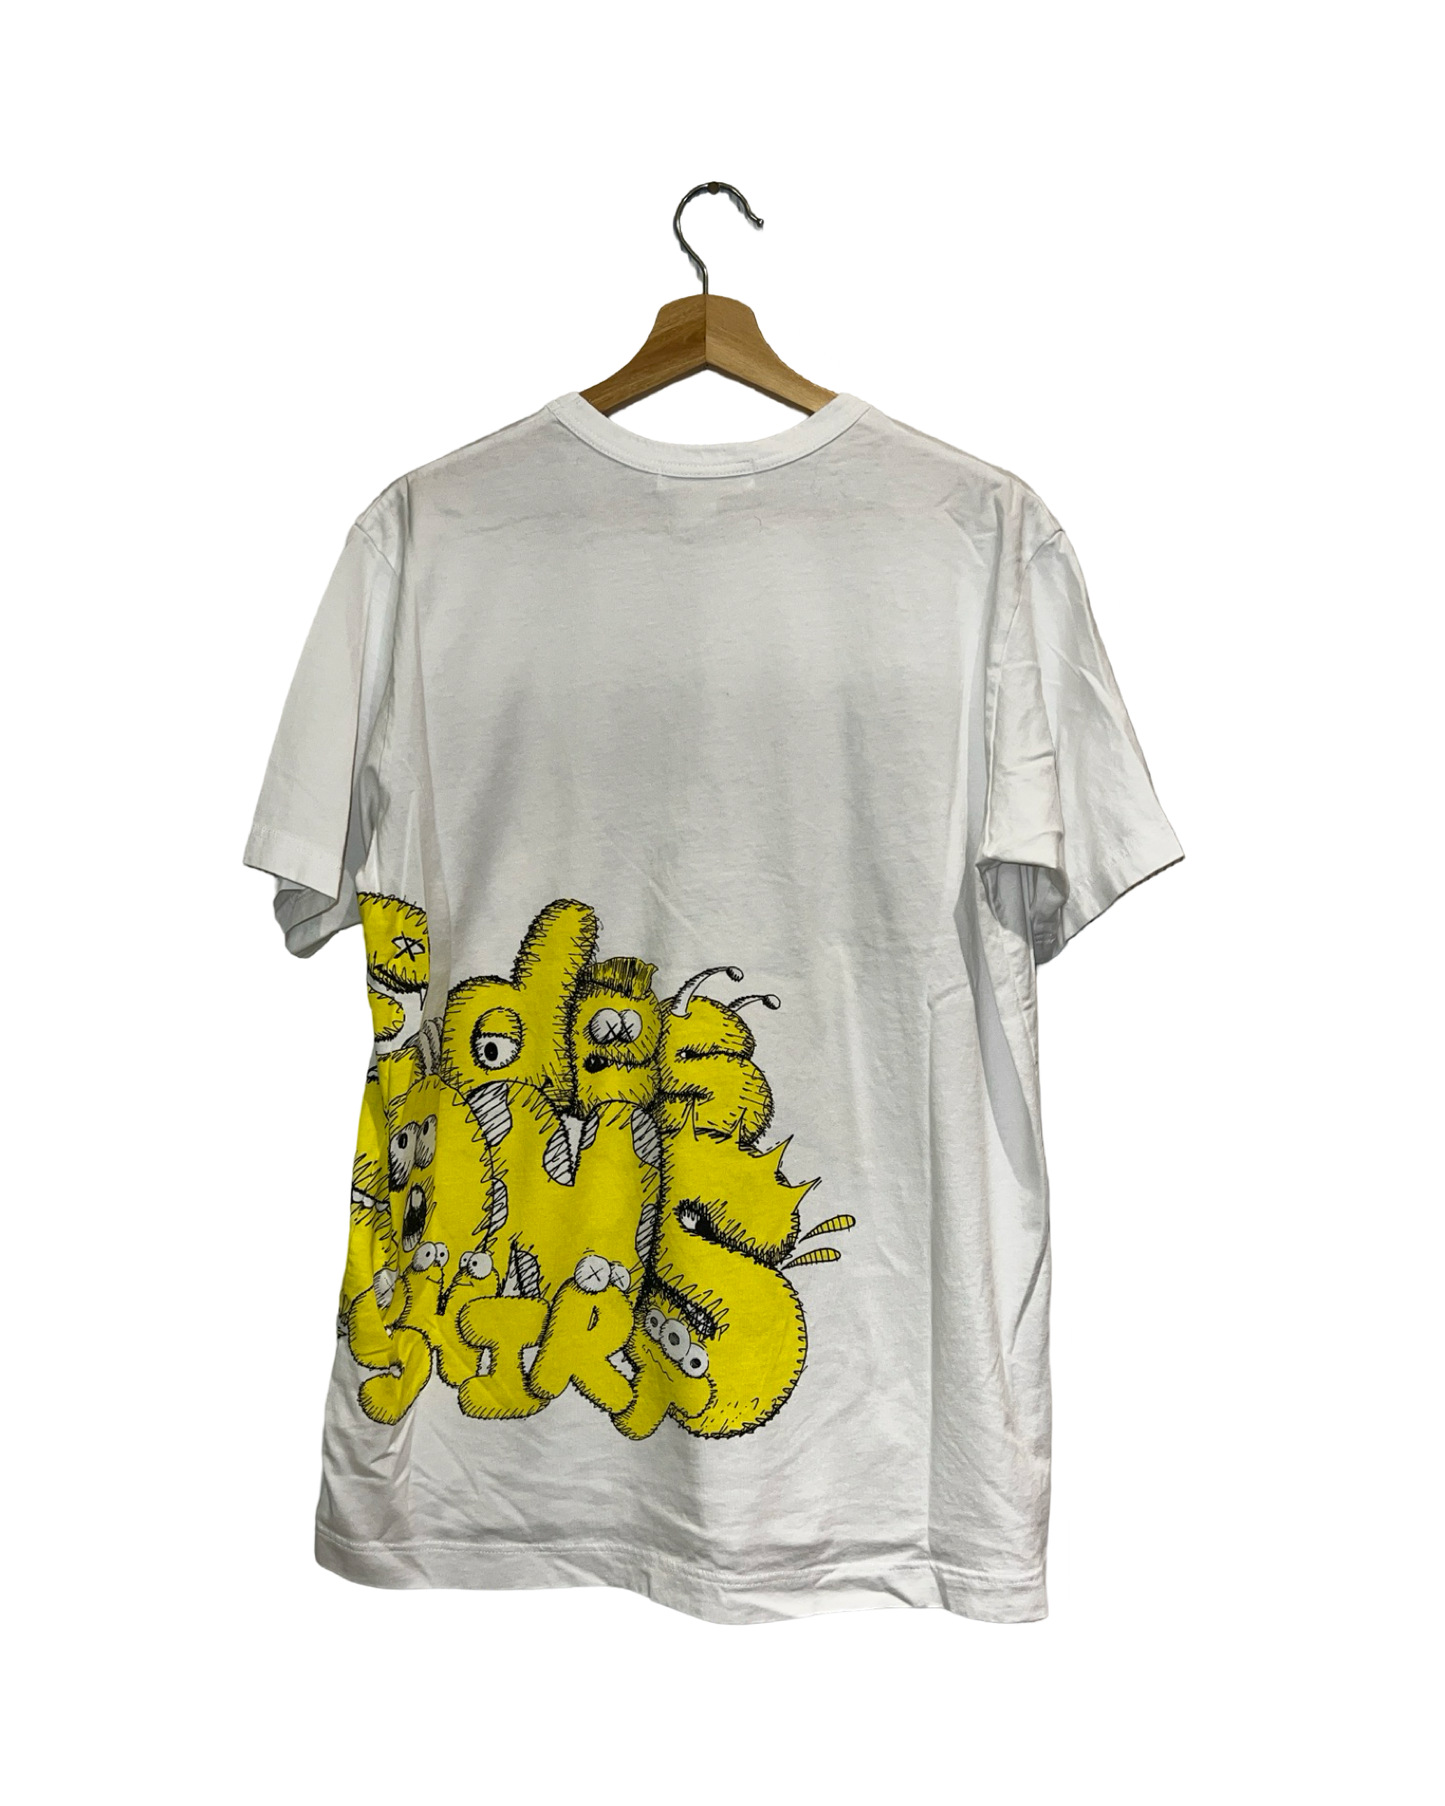 Archive KAWS x Comme Des Garcons Yellow Tee